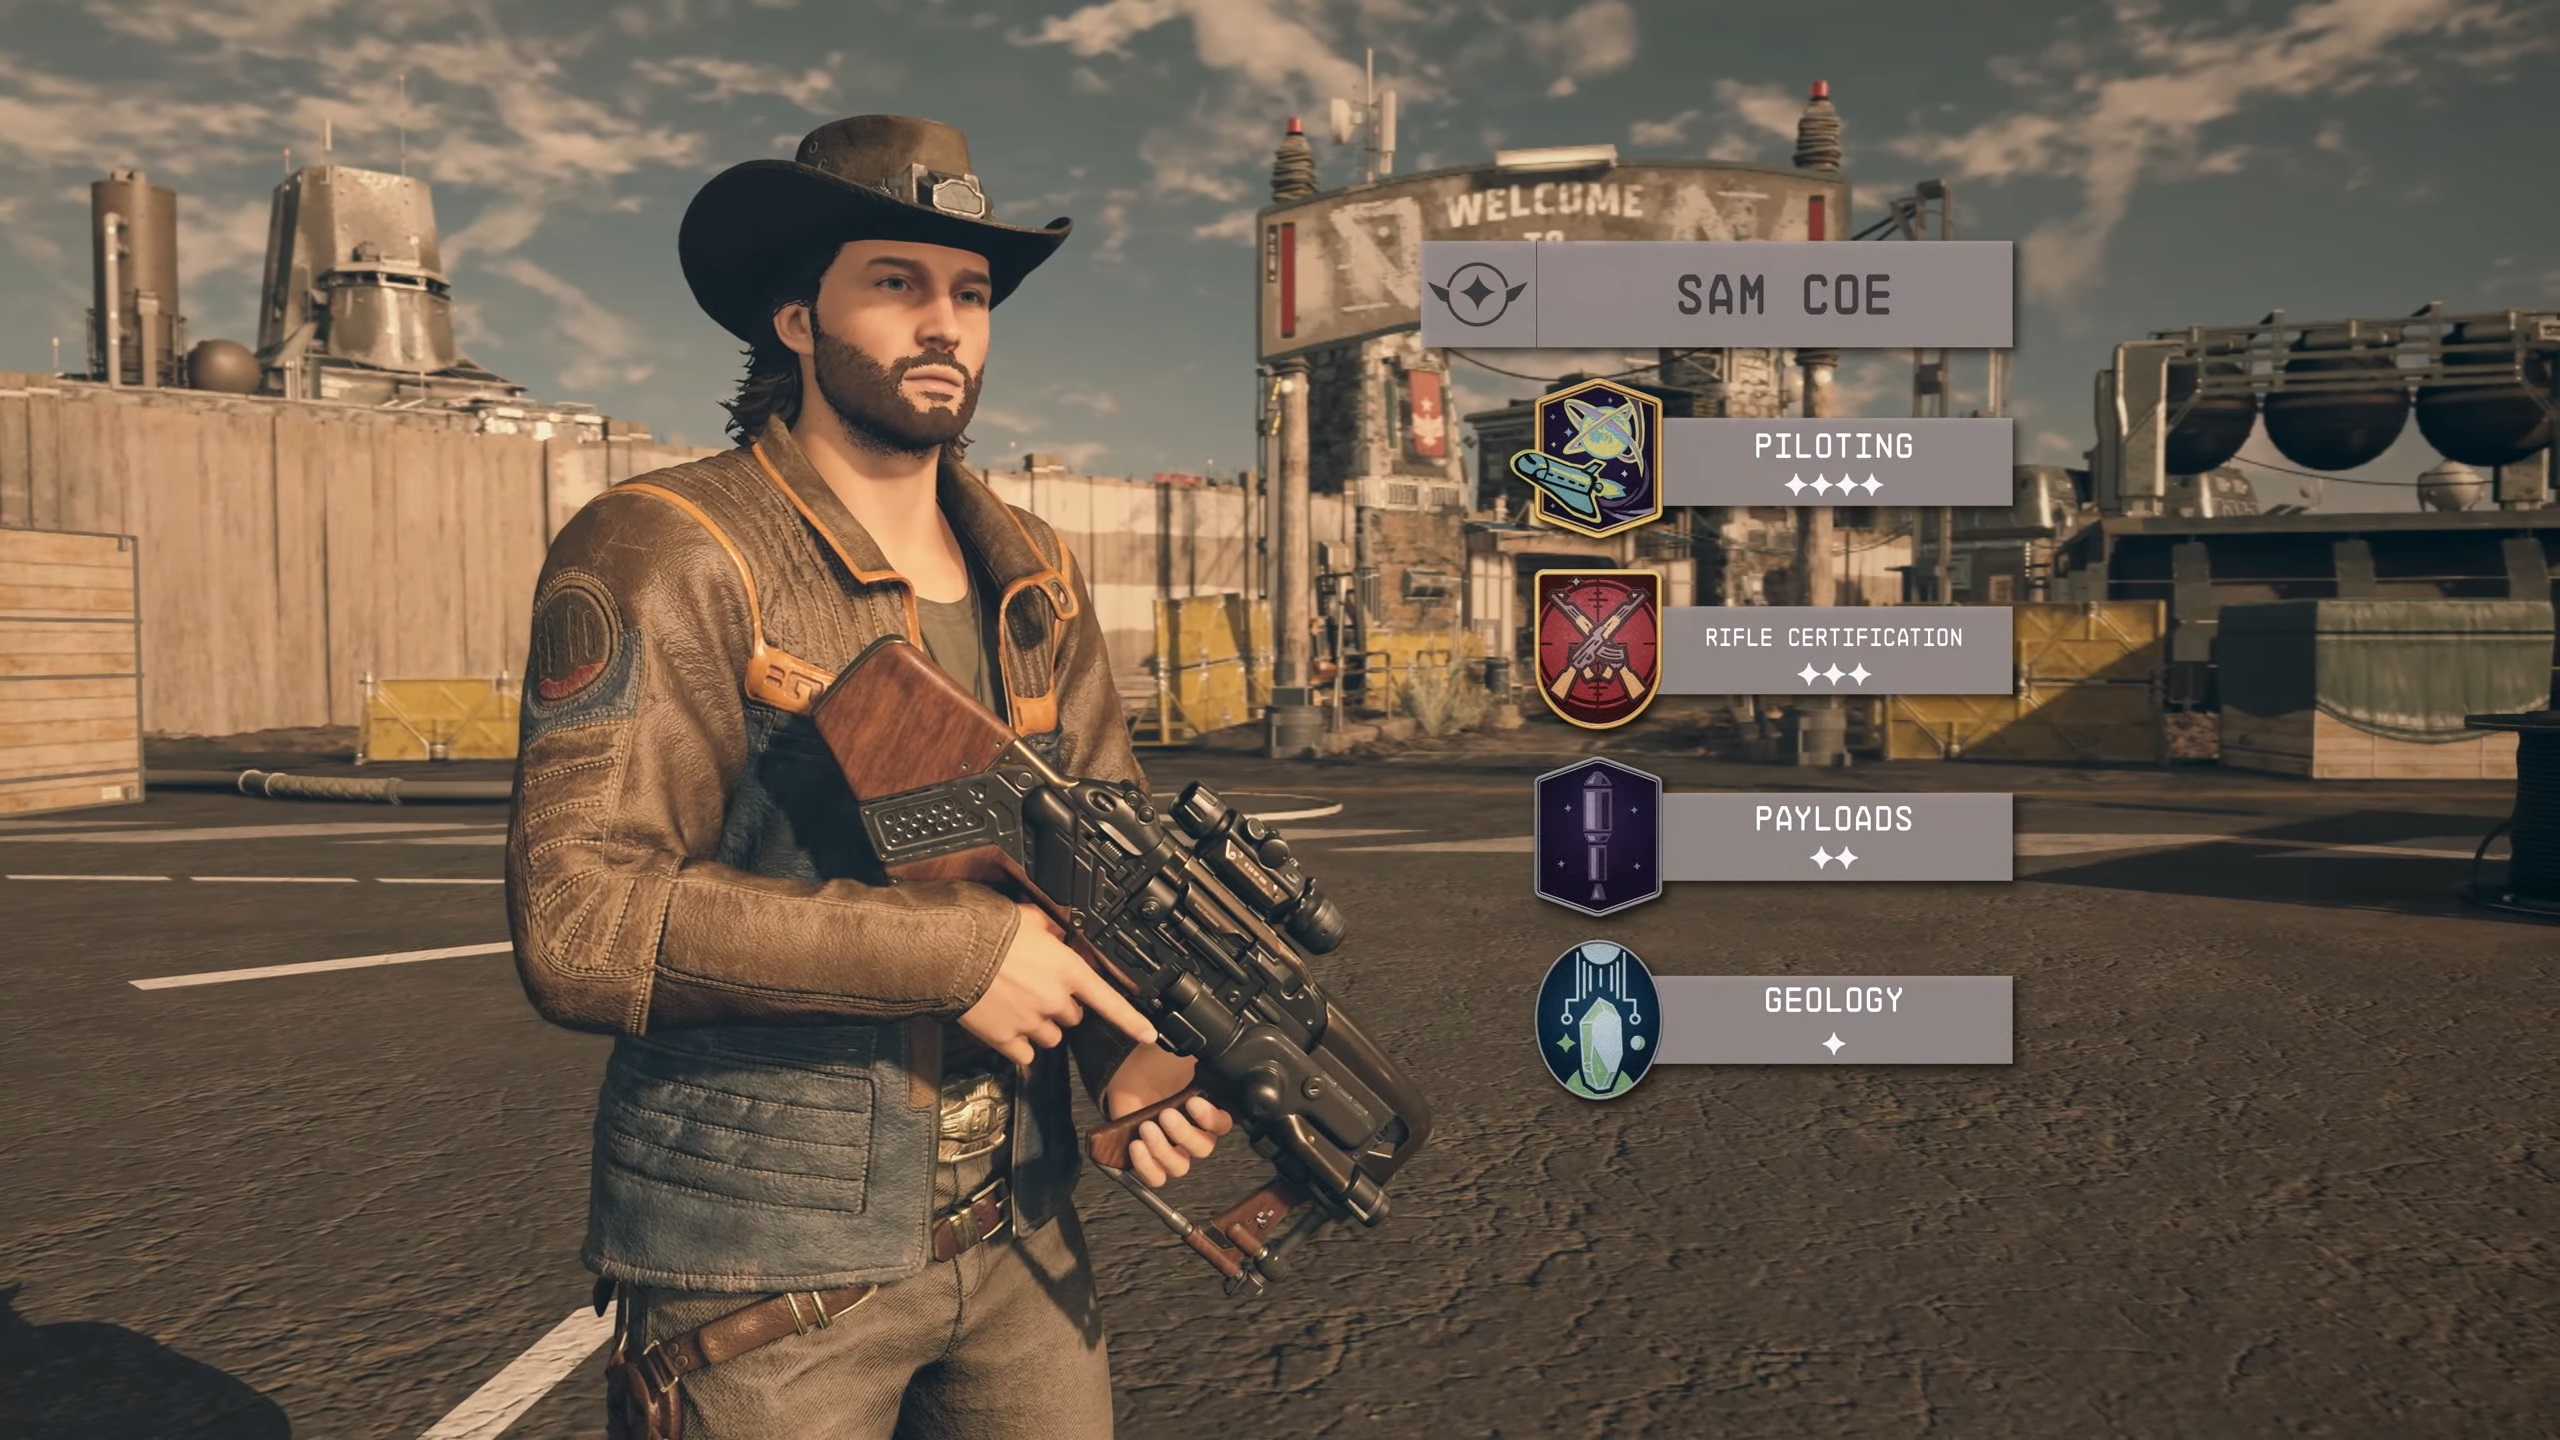 Starfield romance - Sam Coe, a man with facial hair and a cowbody hat holds a gun standing beside an overlay showing his skills